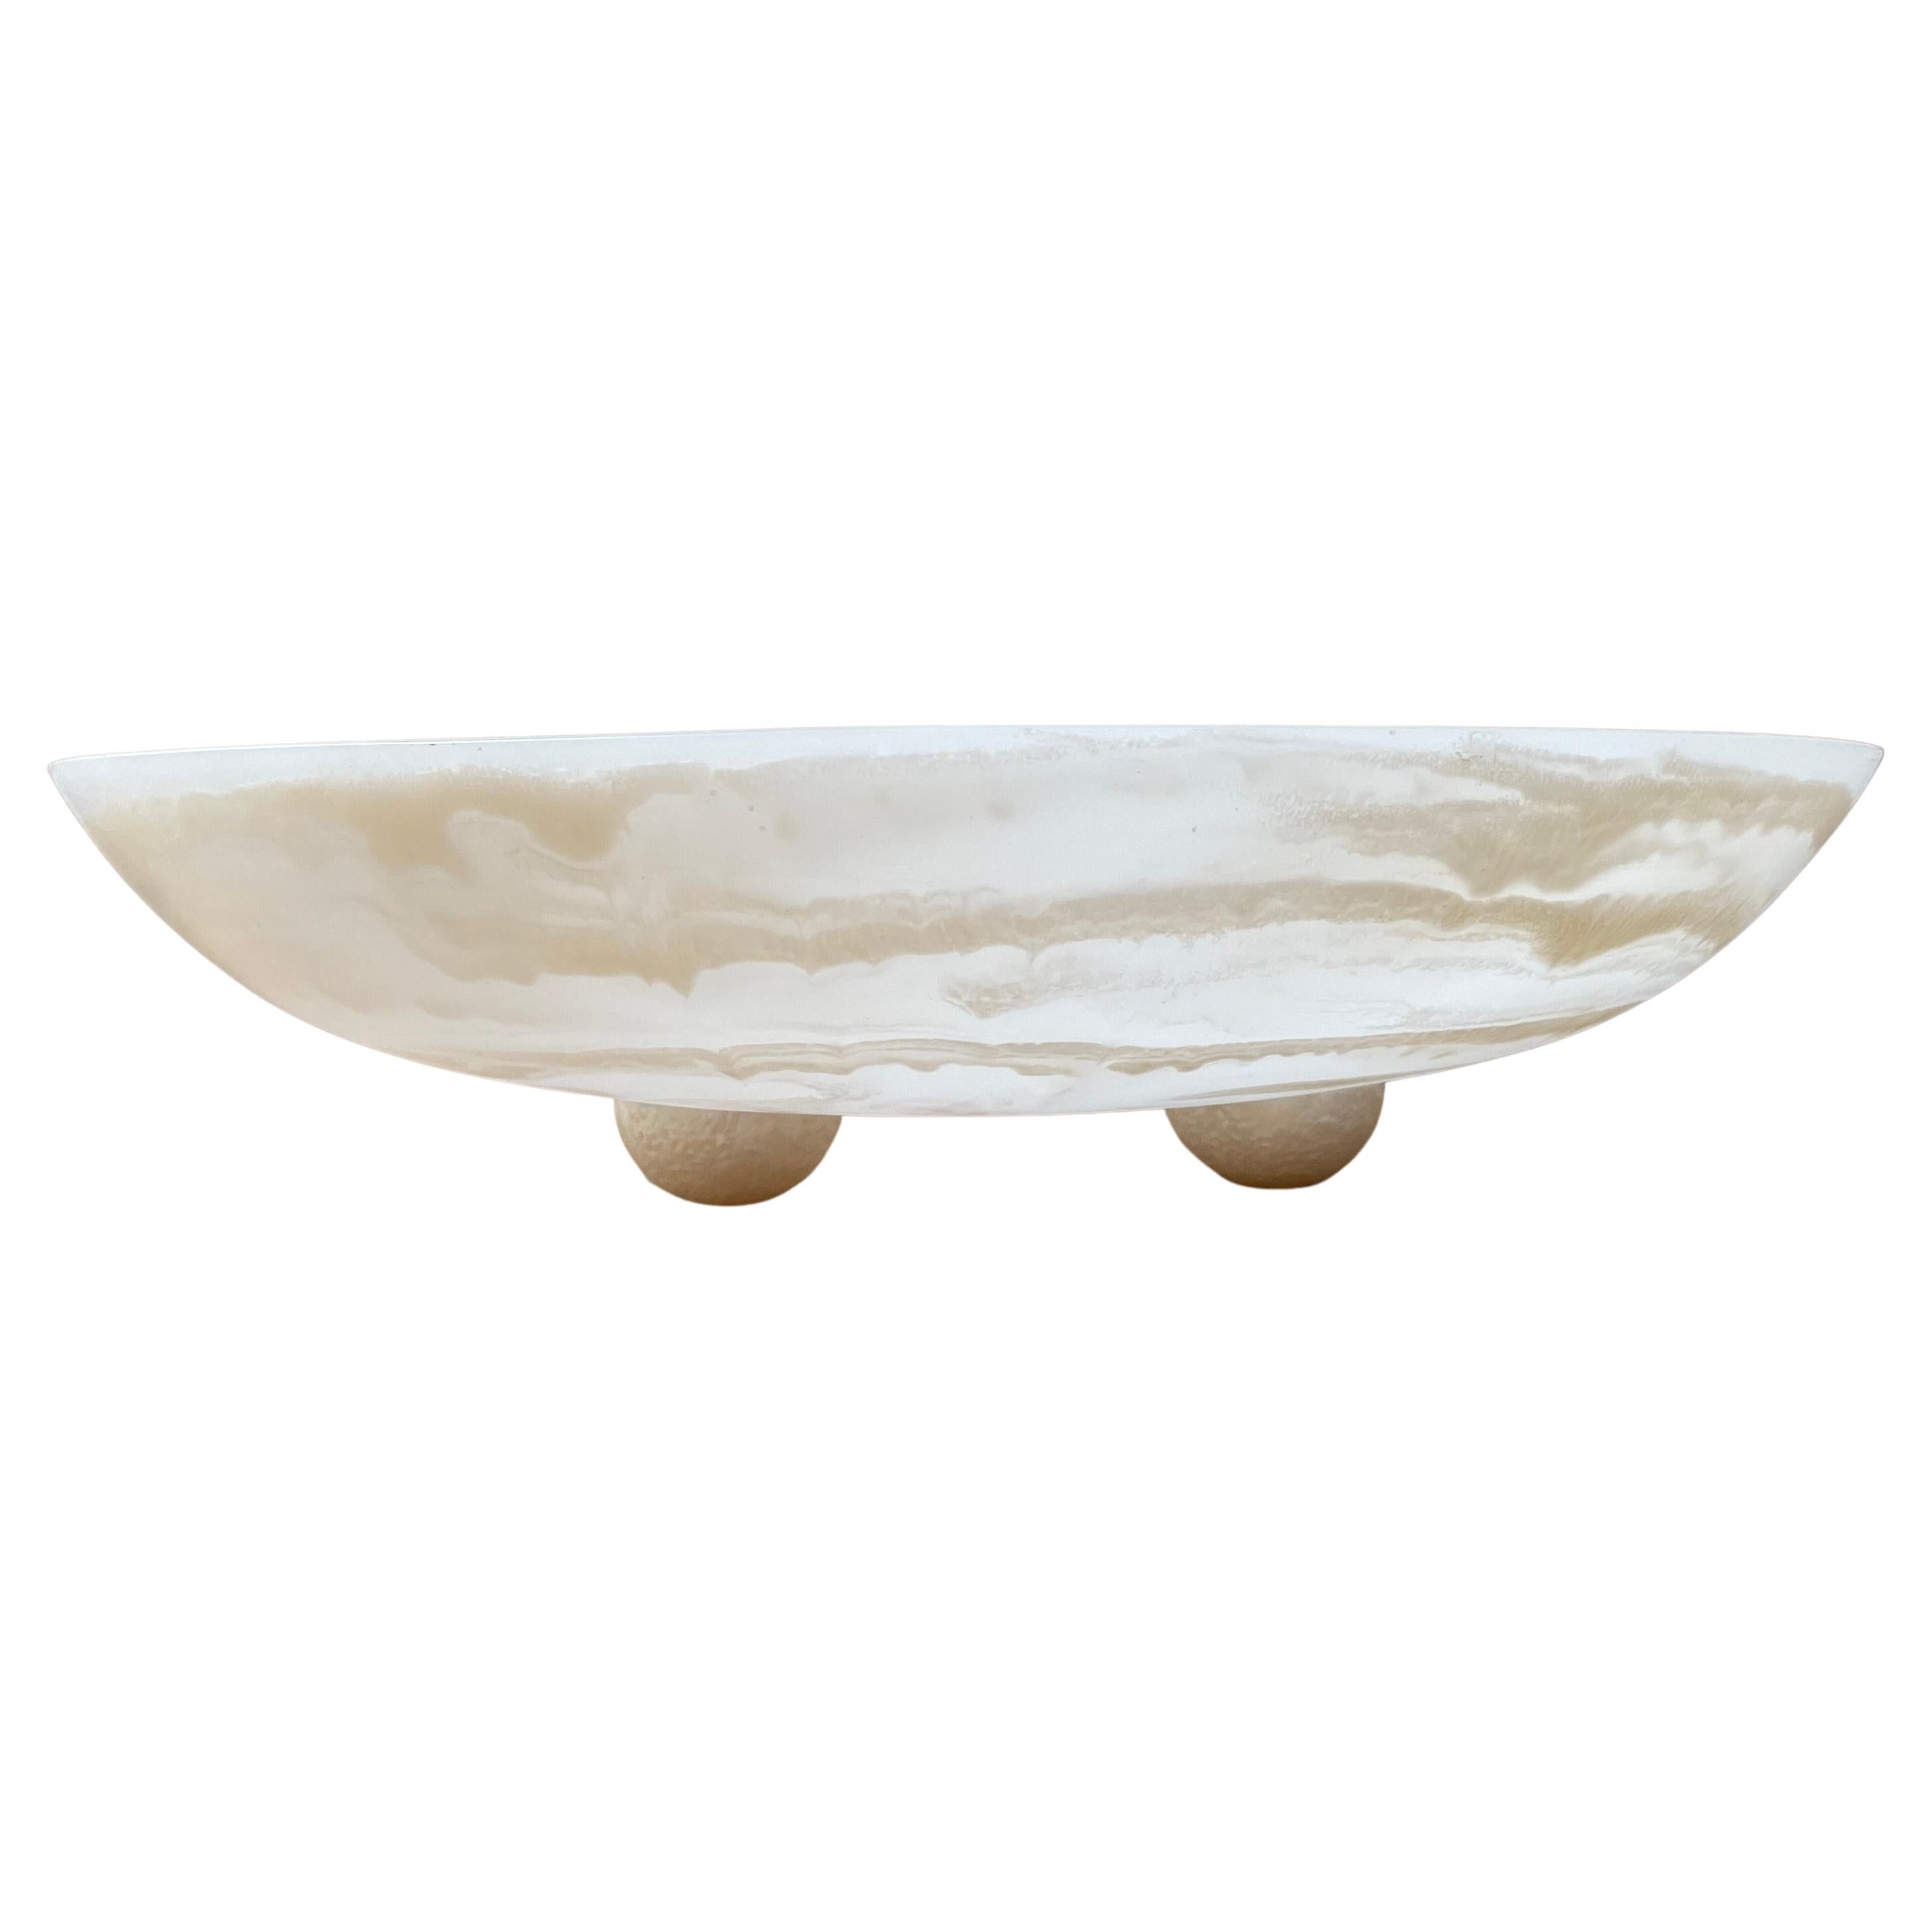 XL Footed Resin Bowl Centerpiece in White and Pearl by Paola Valle